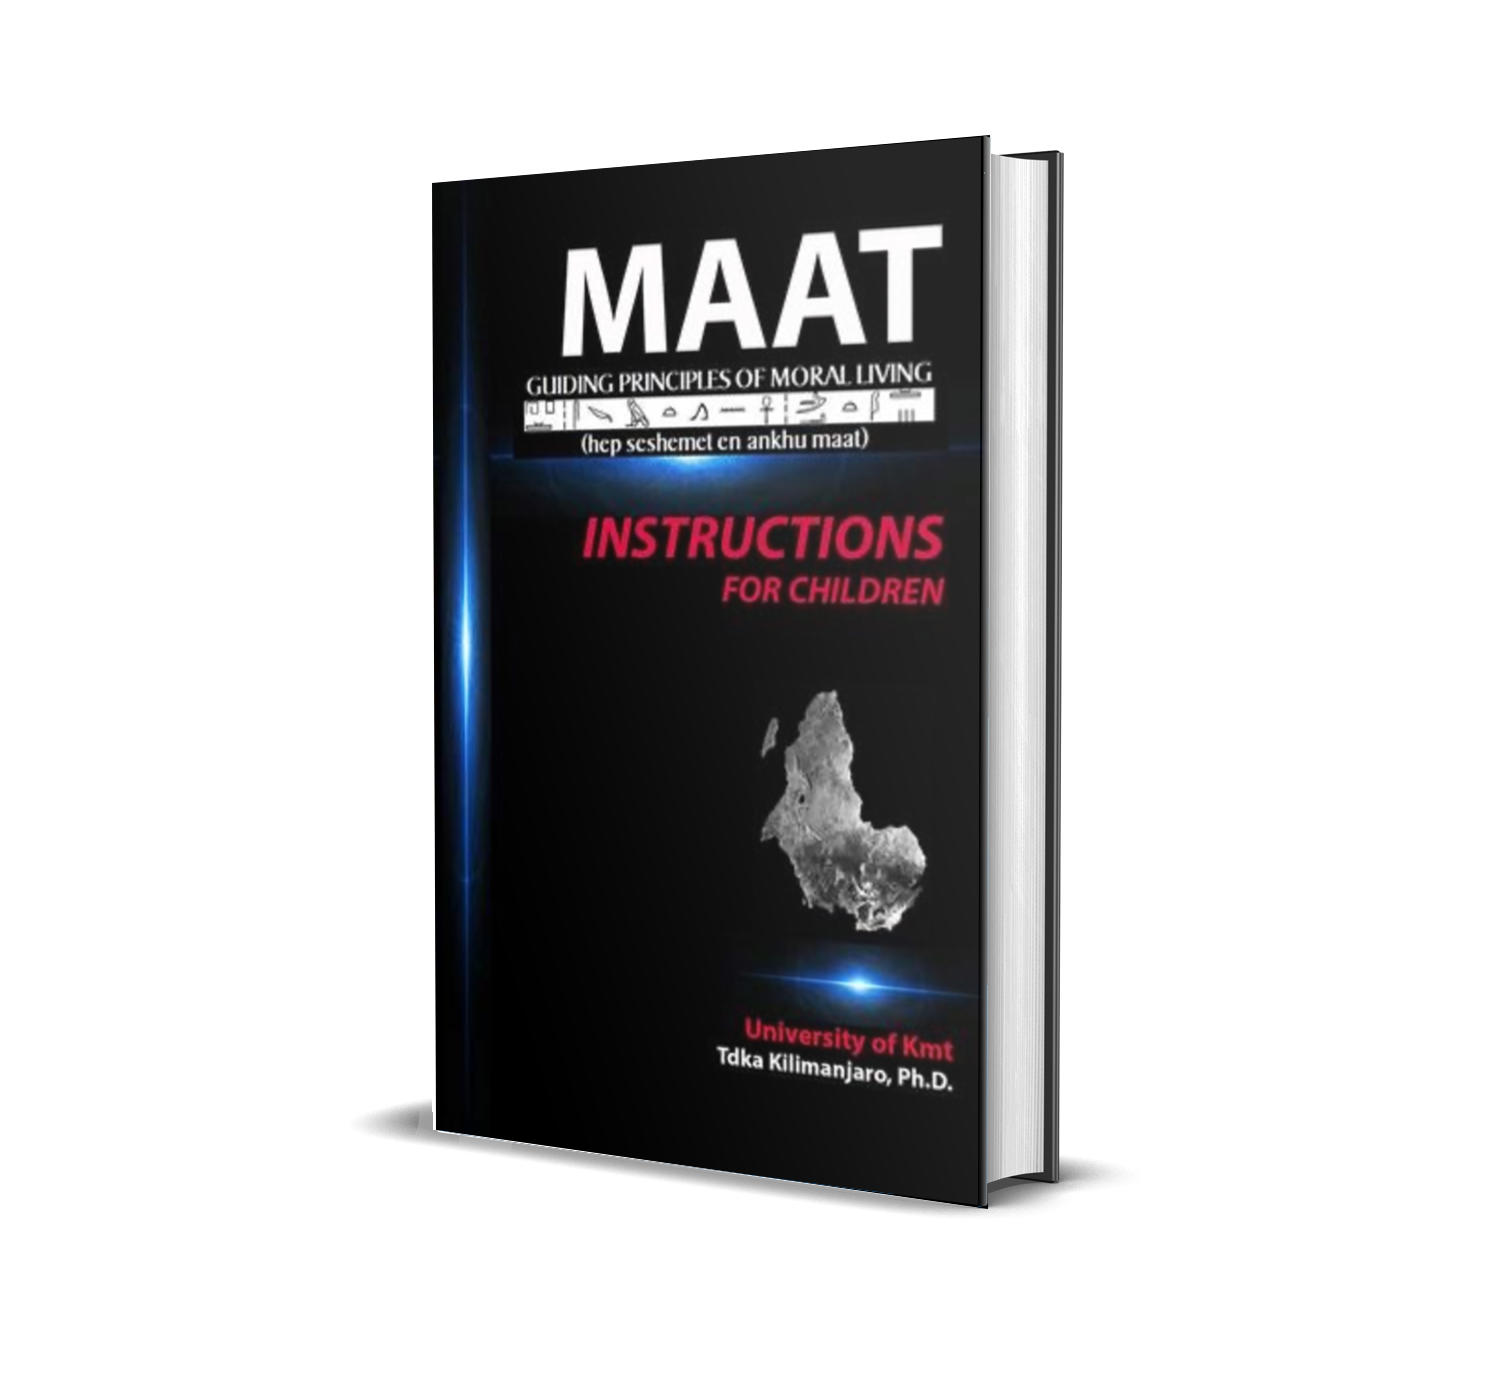 maat Glimlach Teken M.A.A.T. Guiding Principles of Moral Living – Instructions for Children by  Tdka Kilimanjaro, Ph.D. – African Consciousness Bookstore